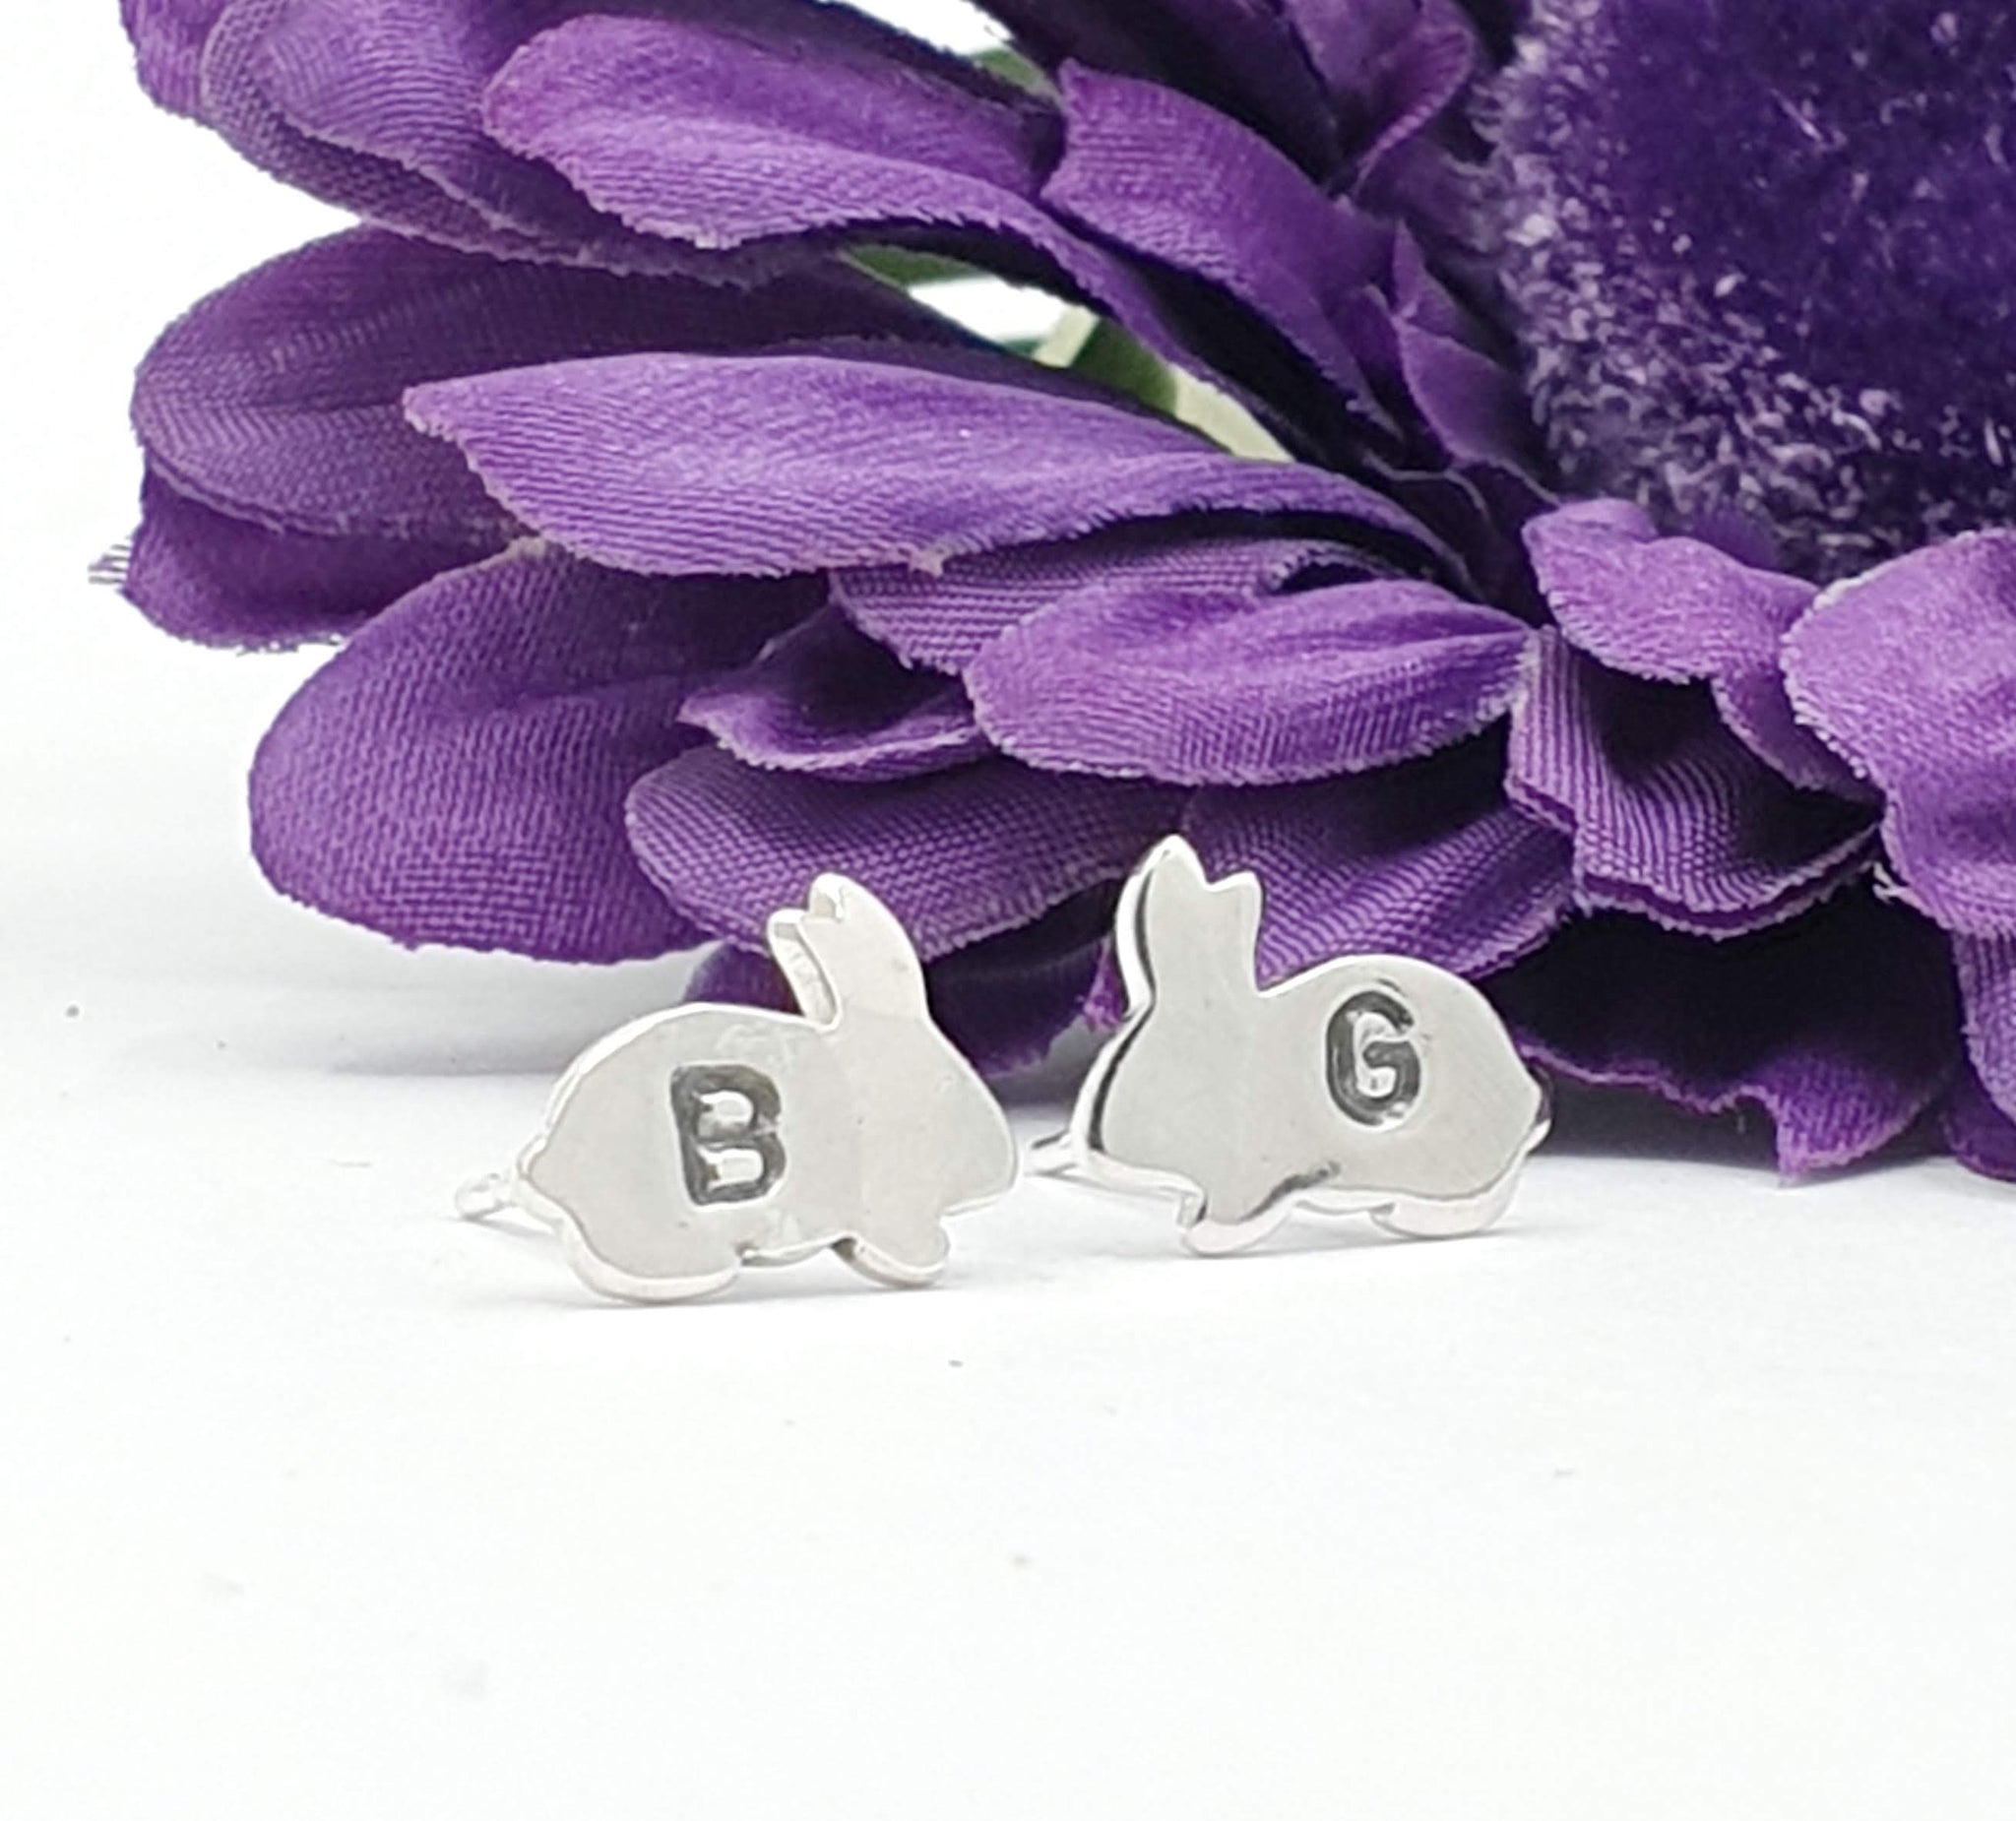 Silver earrings of a bunny sideways with the initial B and G on engraved on each earring 